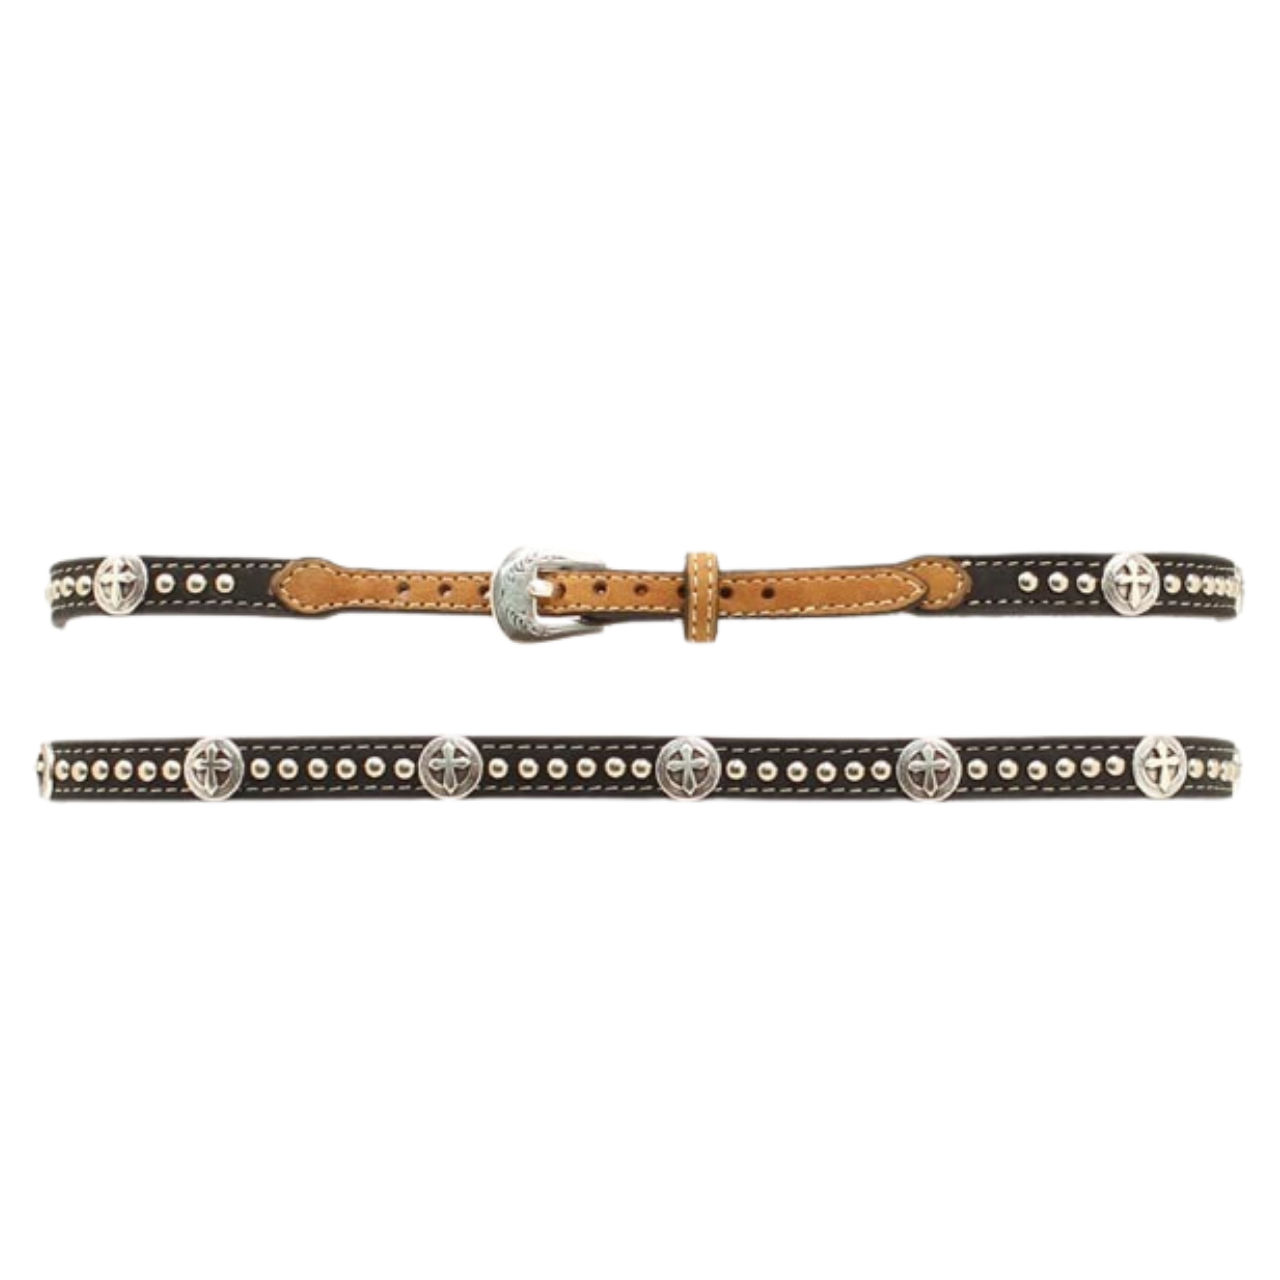 Black/Brown Leather Studded Hatband with Silver Cross Concho